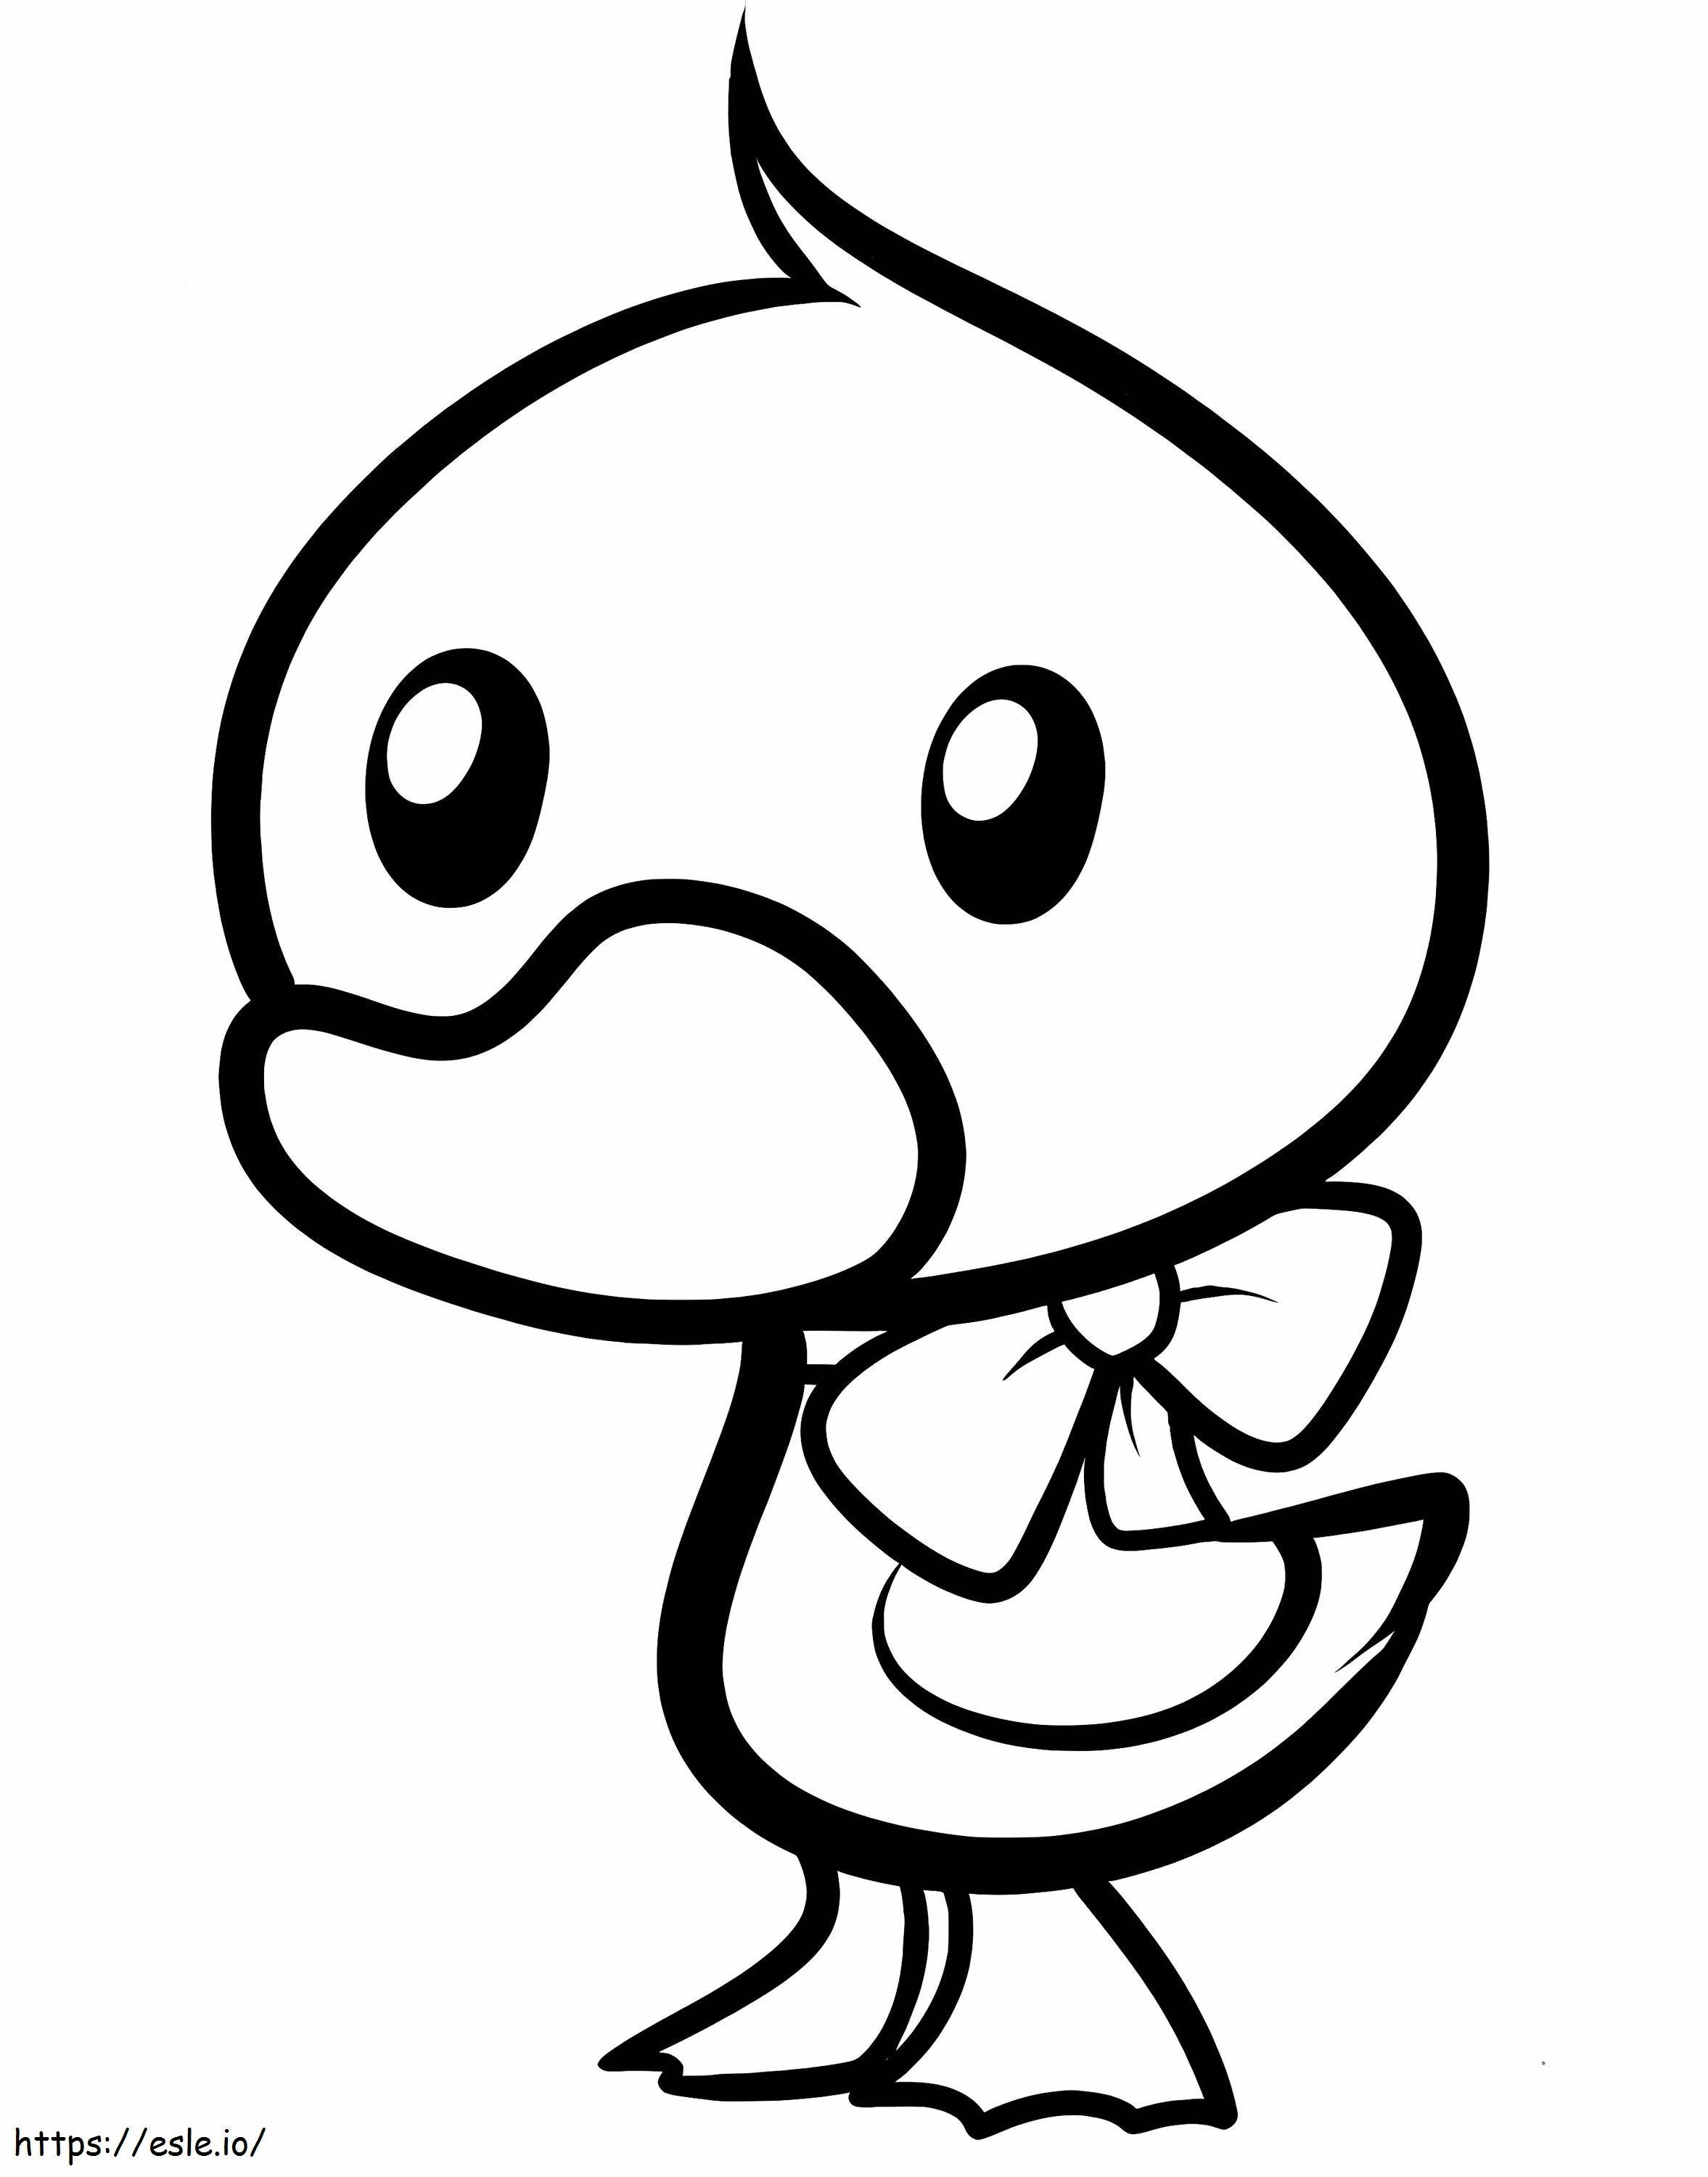 Little Adorable Duckling coloring page